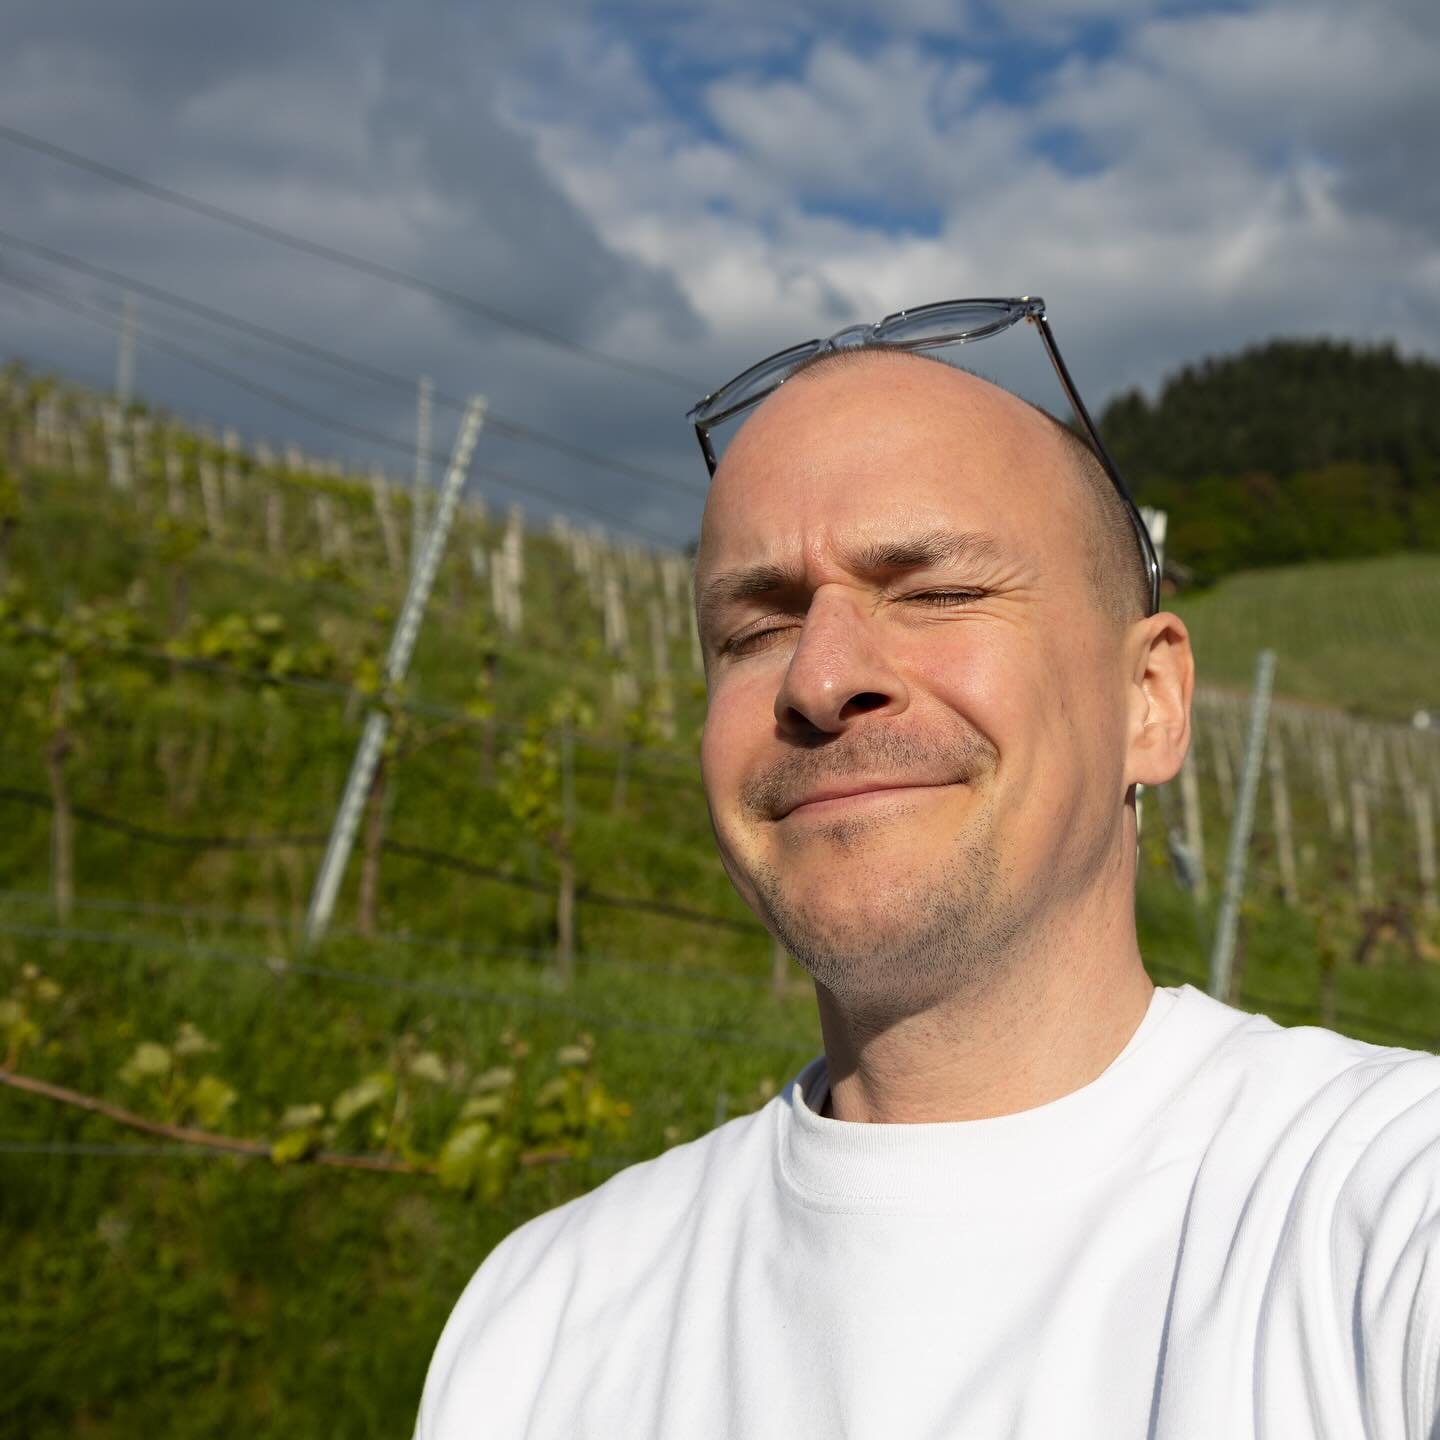 Sunshine and Frost... It was easy to forget the disastrous night in some vineyards during this sunny day. In the very early hours before sunrise on Tuesday morning, winemakers were running around in their vineyards trying to save their vines from fro